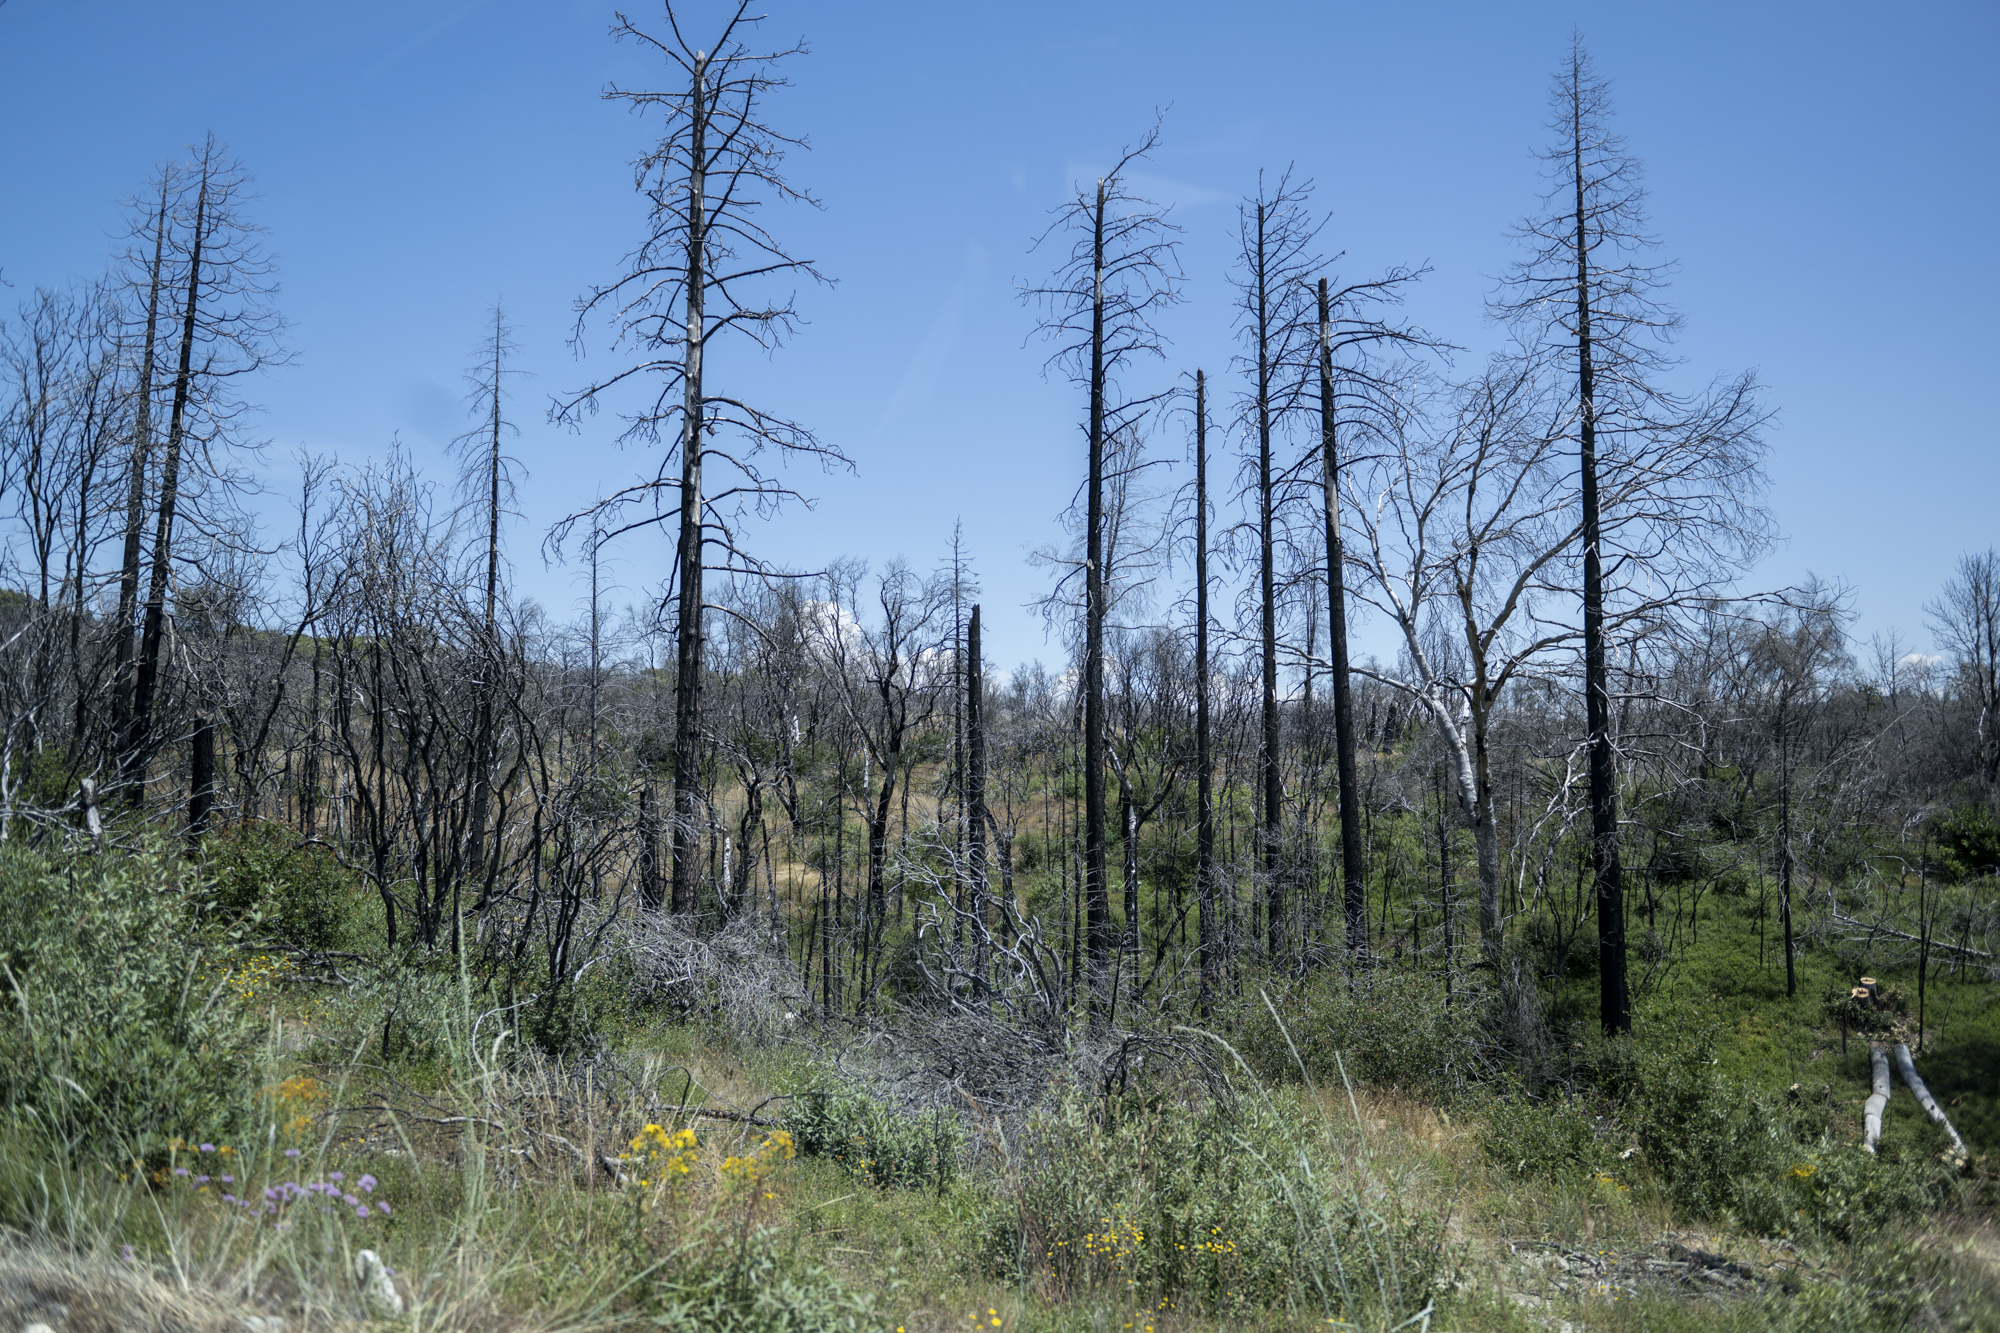 The charred remains of burnt trees stand out from newly grown plants in a field.